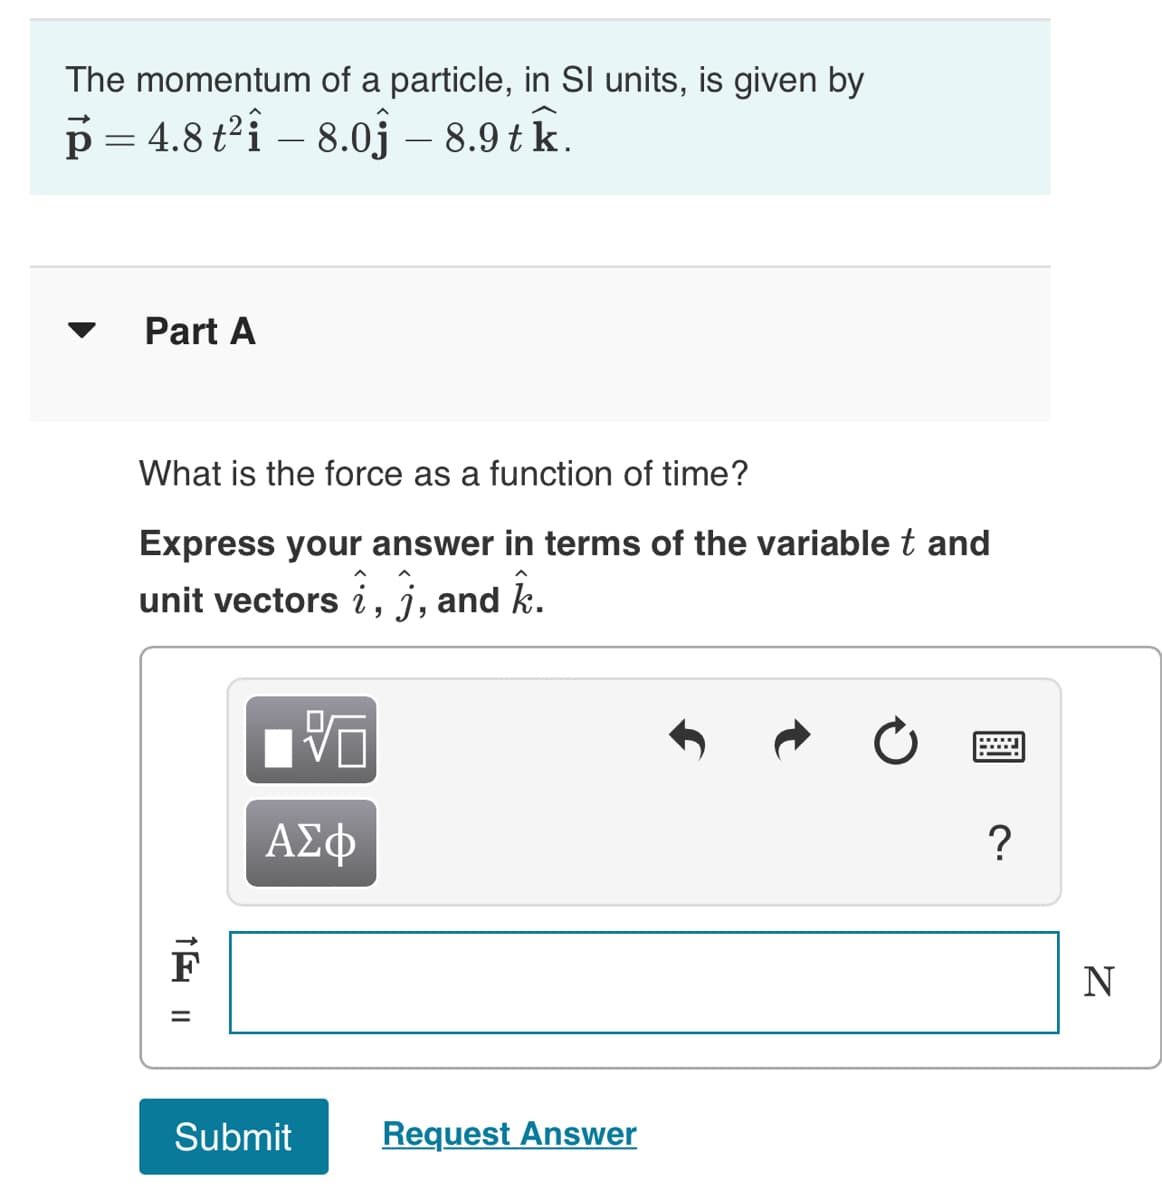 The momentum of a particle, in SI units, is given by
p=4.8 t²i - 8.0 - 8.9 tk.
Part A
What is the force as a function of time?
Express your answer in terms of the variable t and
unit vectors i, j, and k.
1 11
ΑΣΦ
Submit
Request Answer
?
N